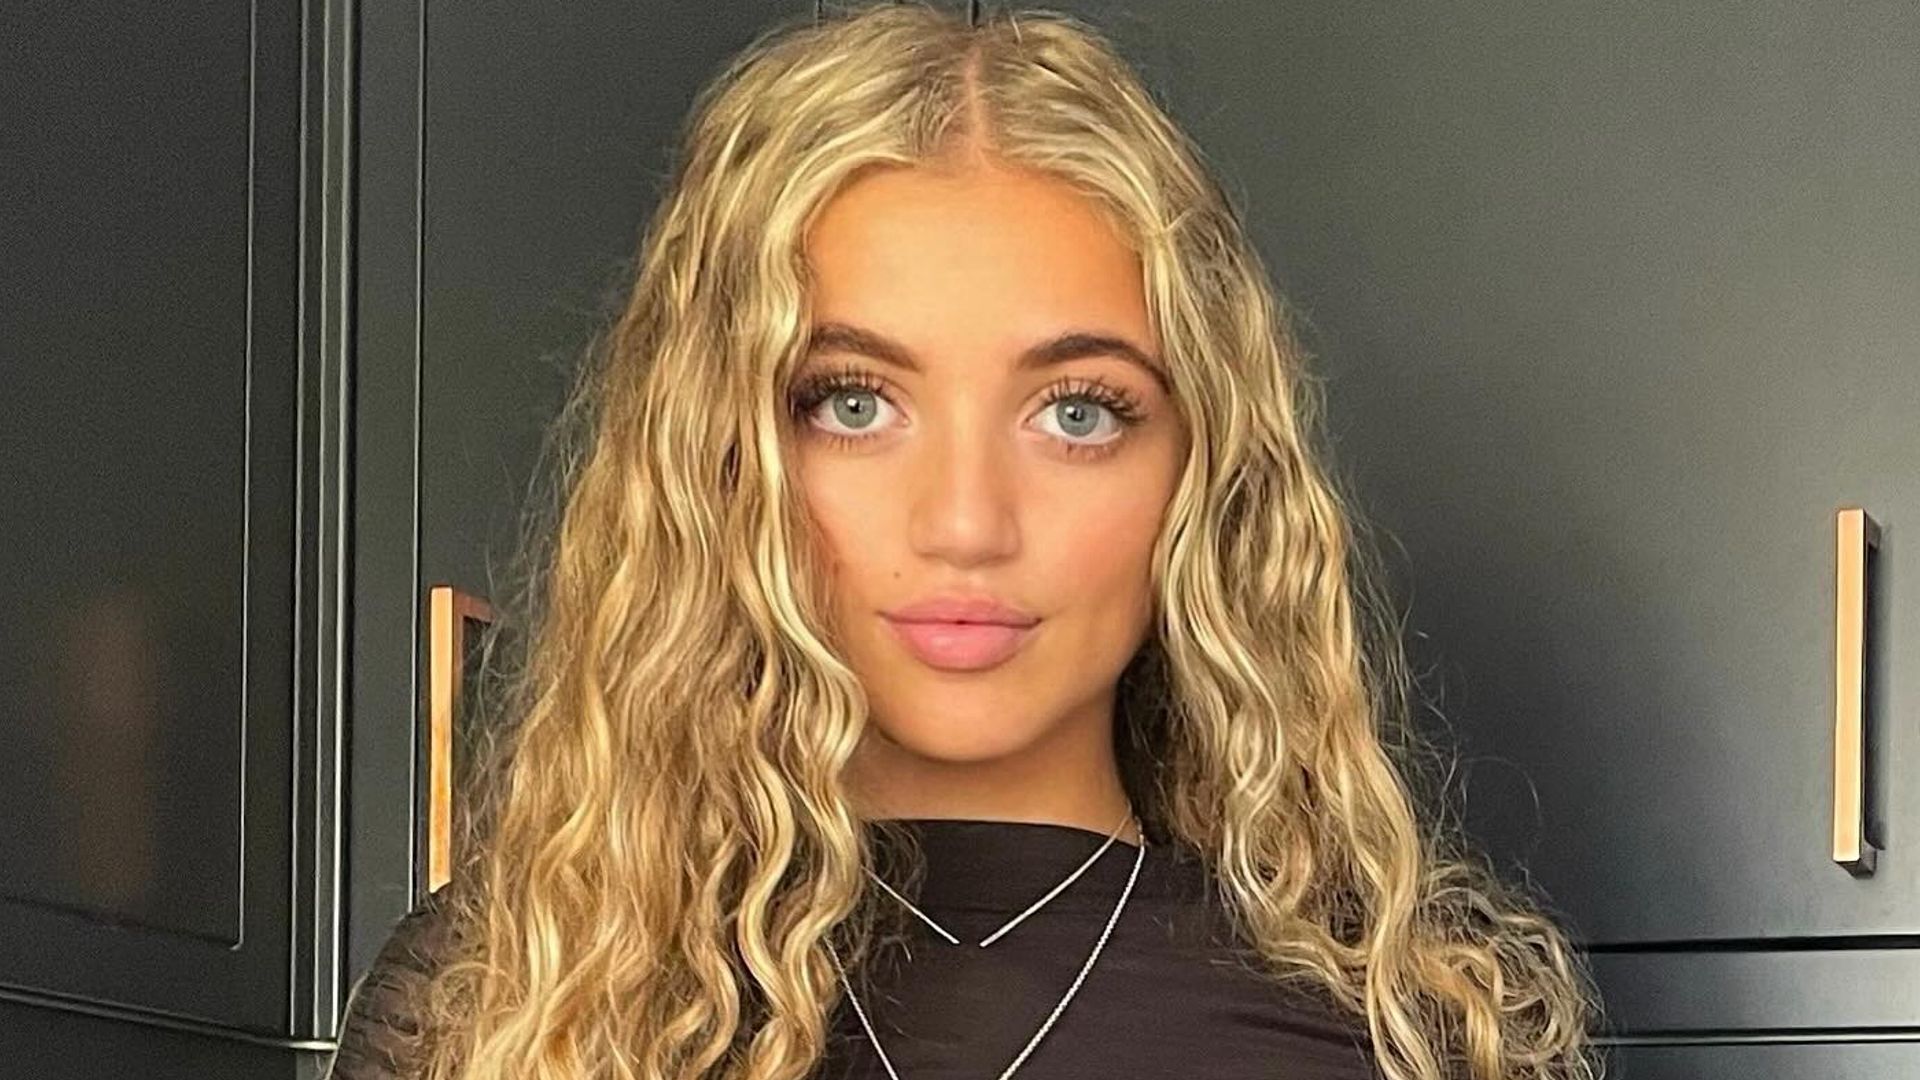 Princess Andre shows off Rapunzel ringlets in dazzling photo